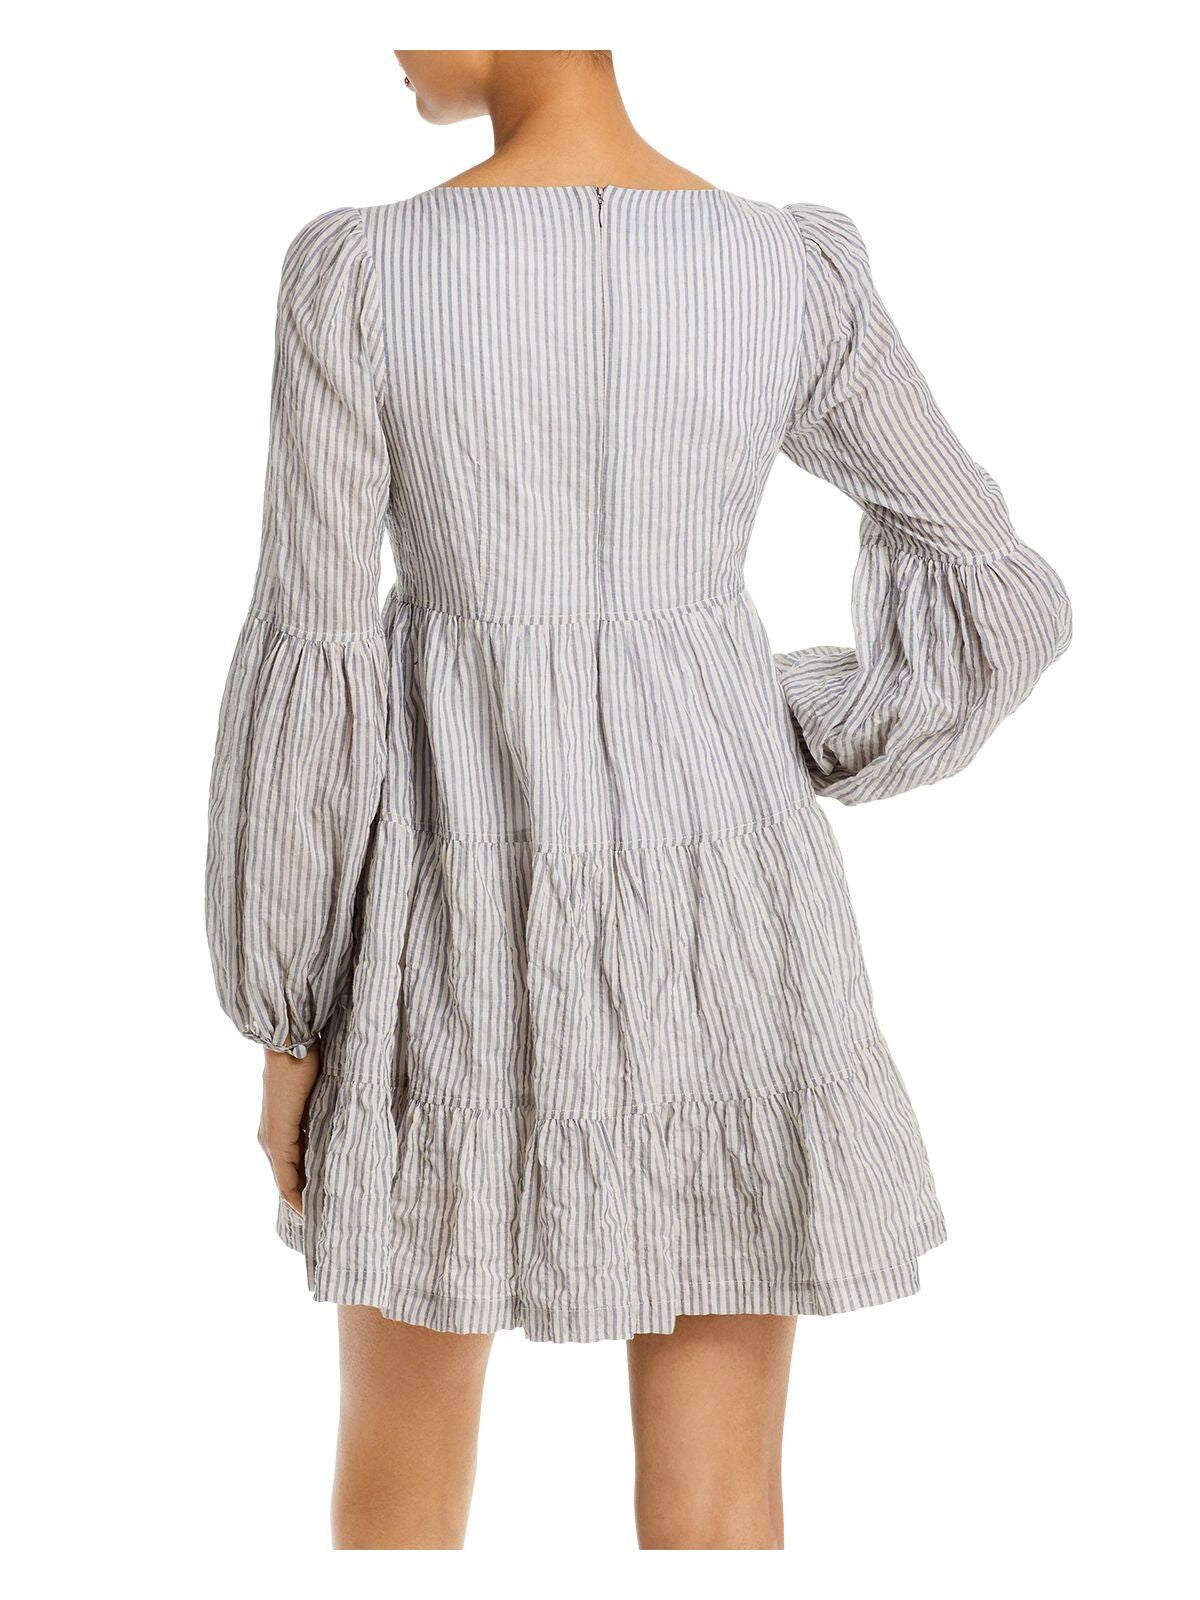 CINQ A SEPT Womens Ivory Zippered Lined Long Balloon Sleeve Striped Scoop Neck Mini Party Baby Doll Dress 2